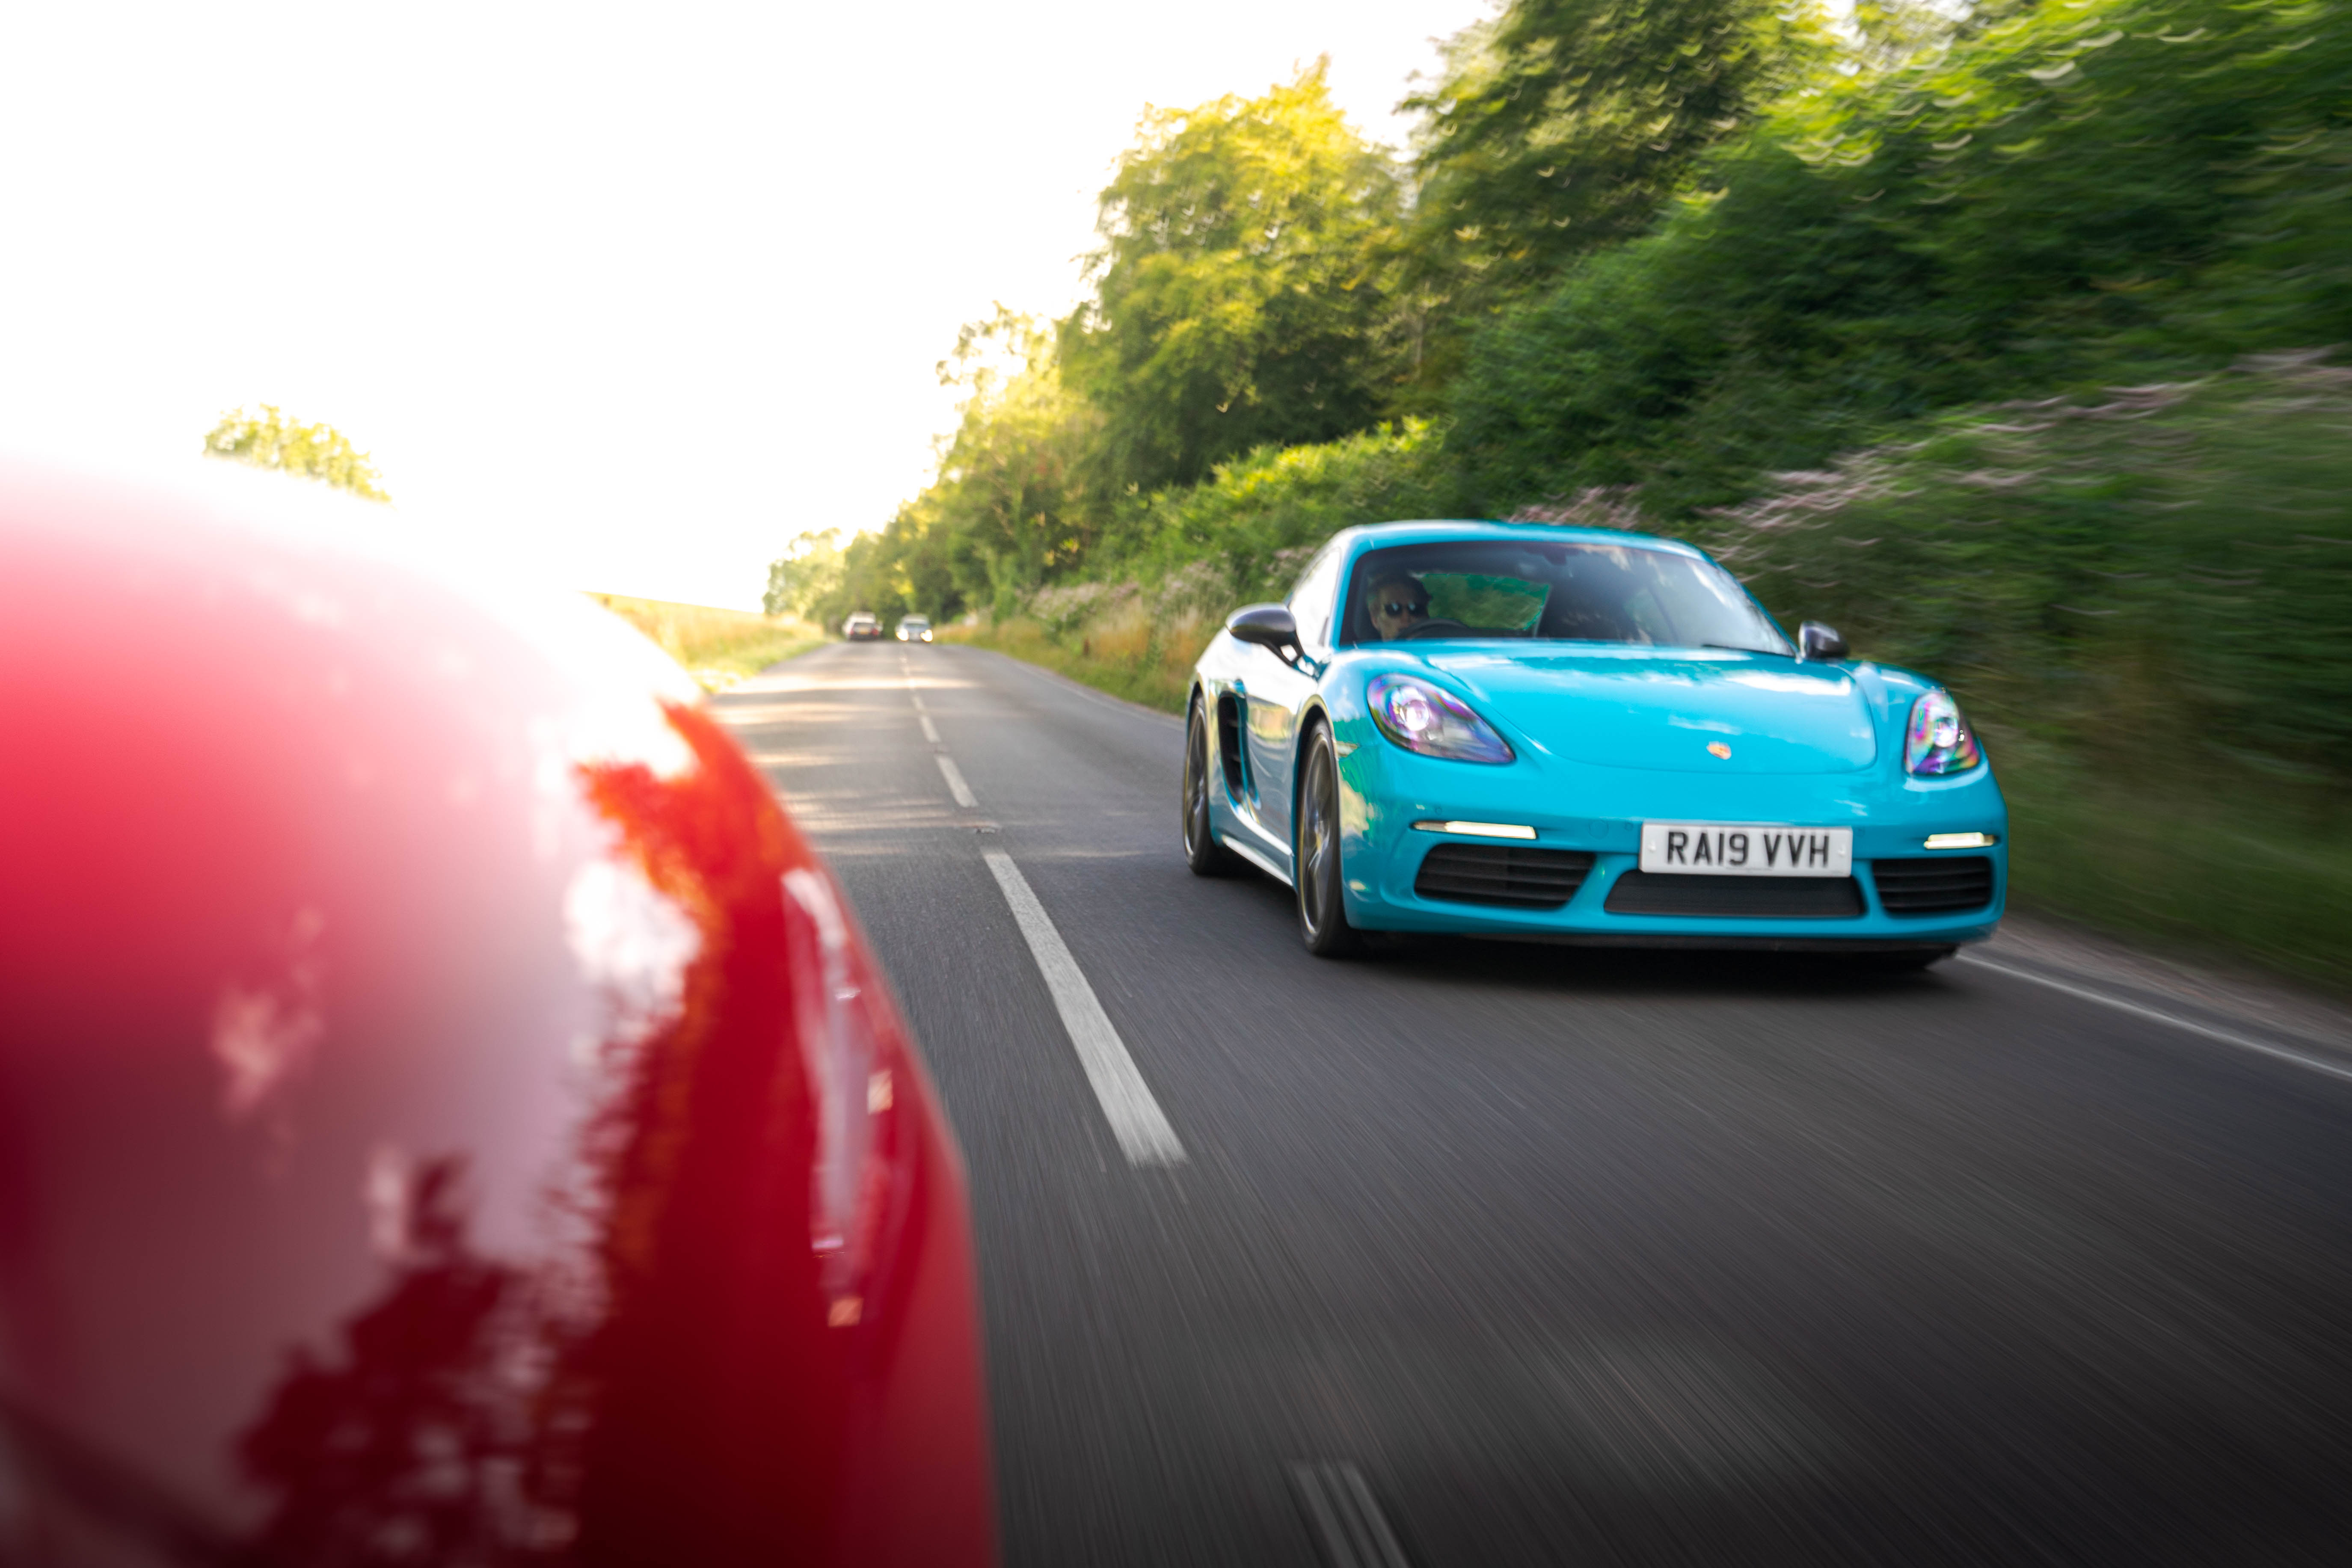 The Cayman's sorted suspension is ideally setup for UK roads 